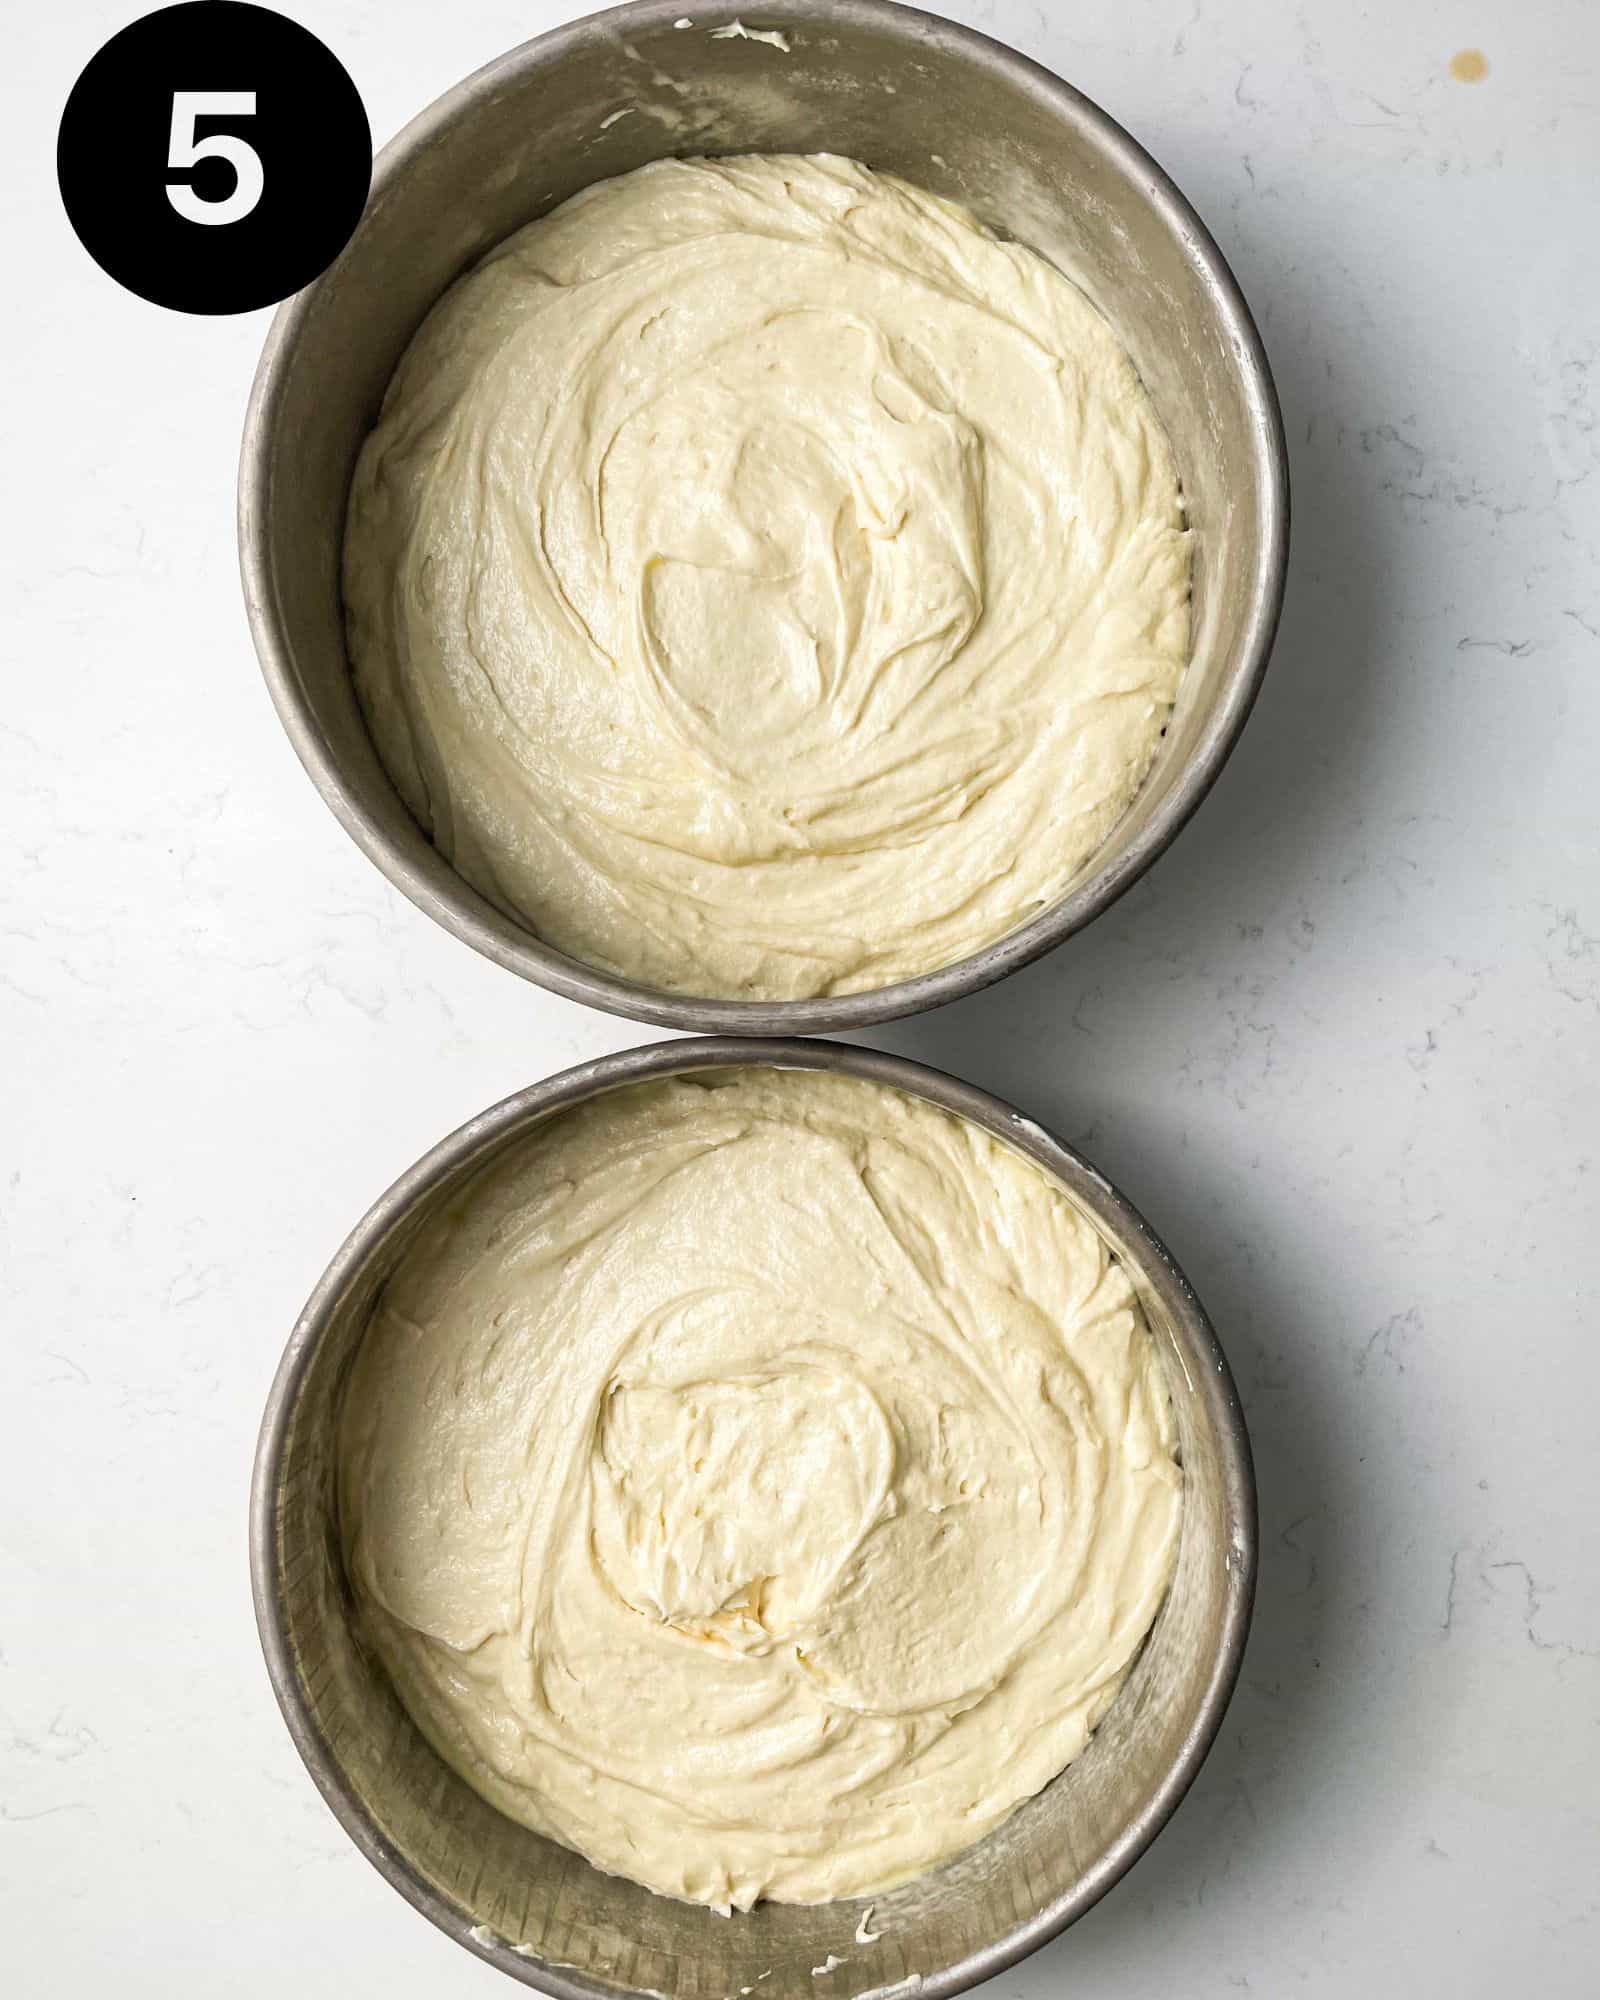 cake batter in two 9-inch baking pans.